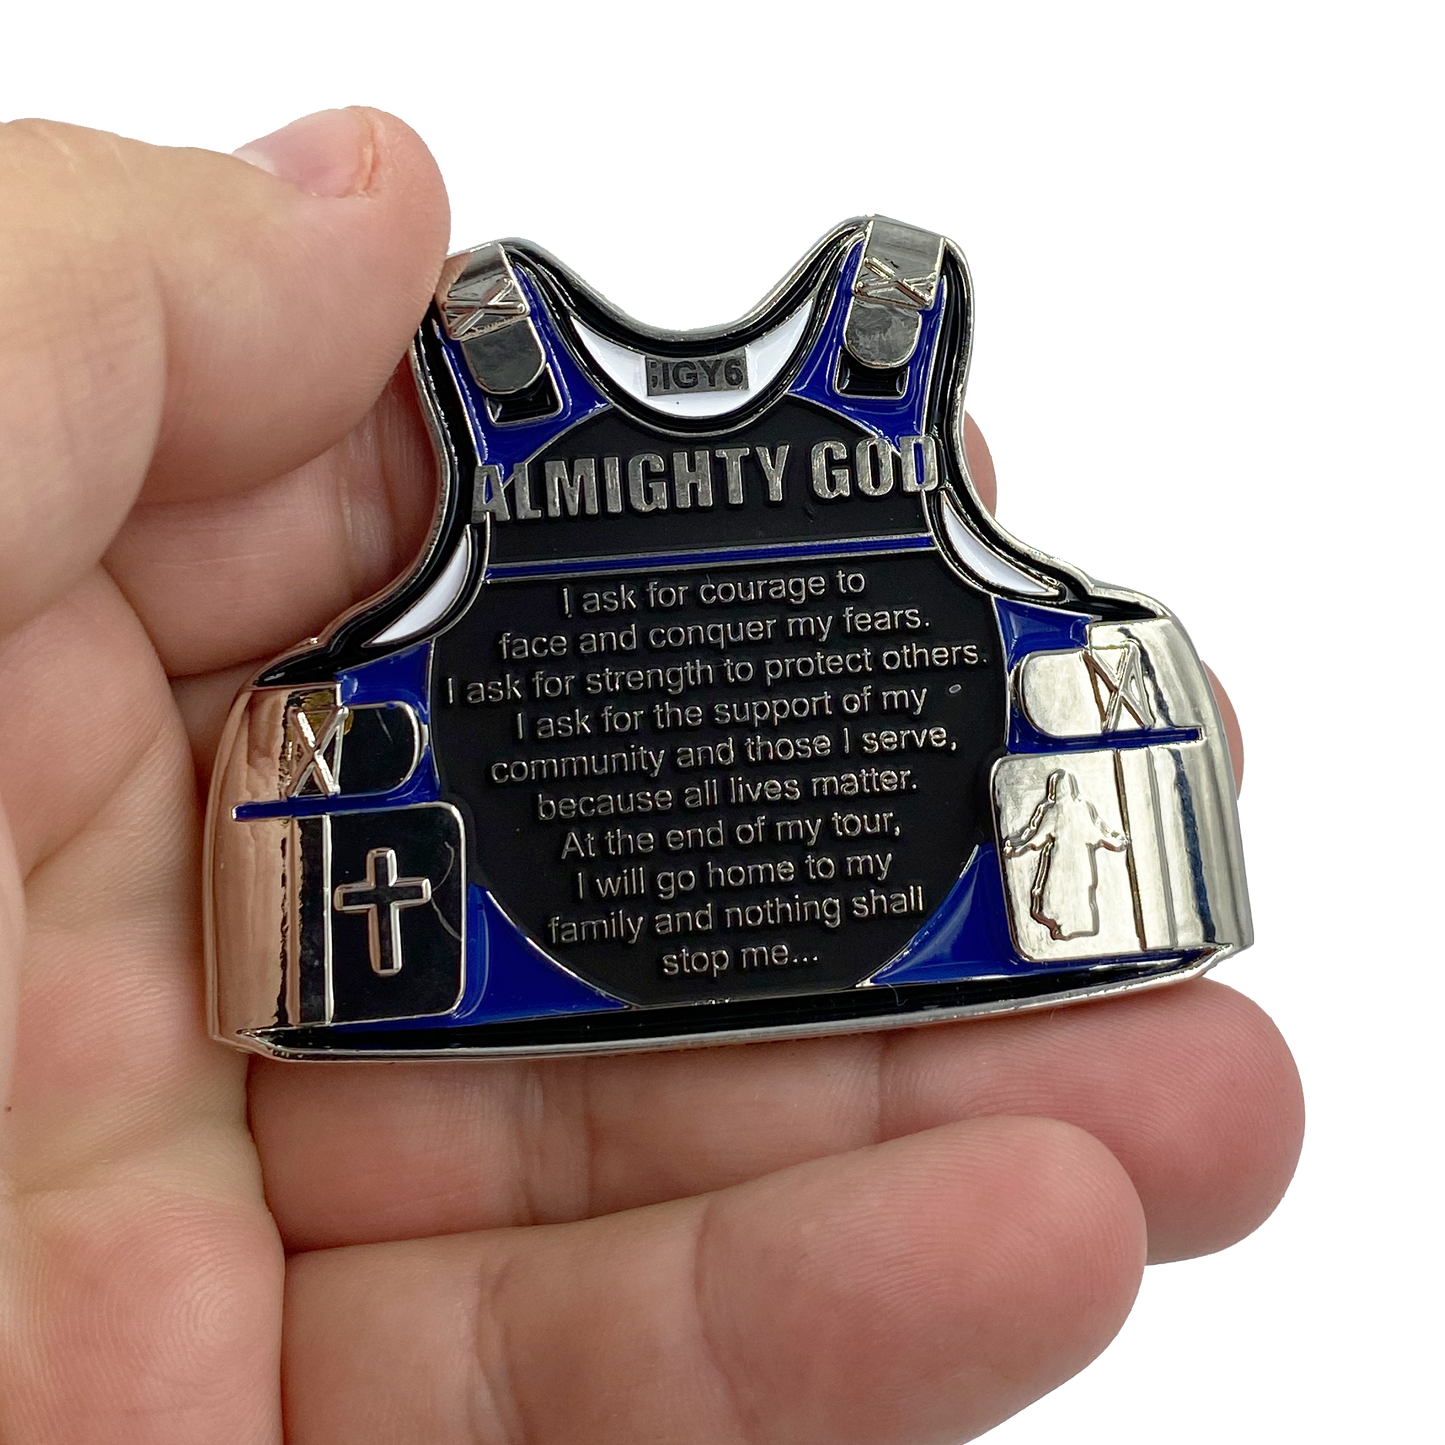 DL7-13 Police Officer's Prayer God Almighty Challenge Coin Thin Blue Line Tactical Body Armor